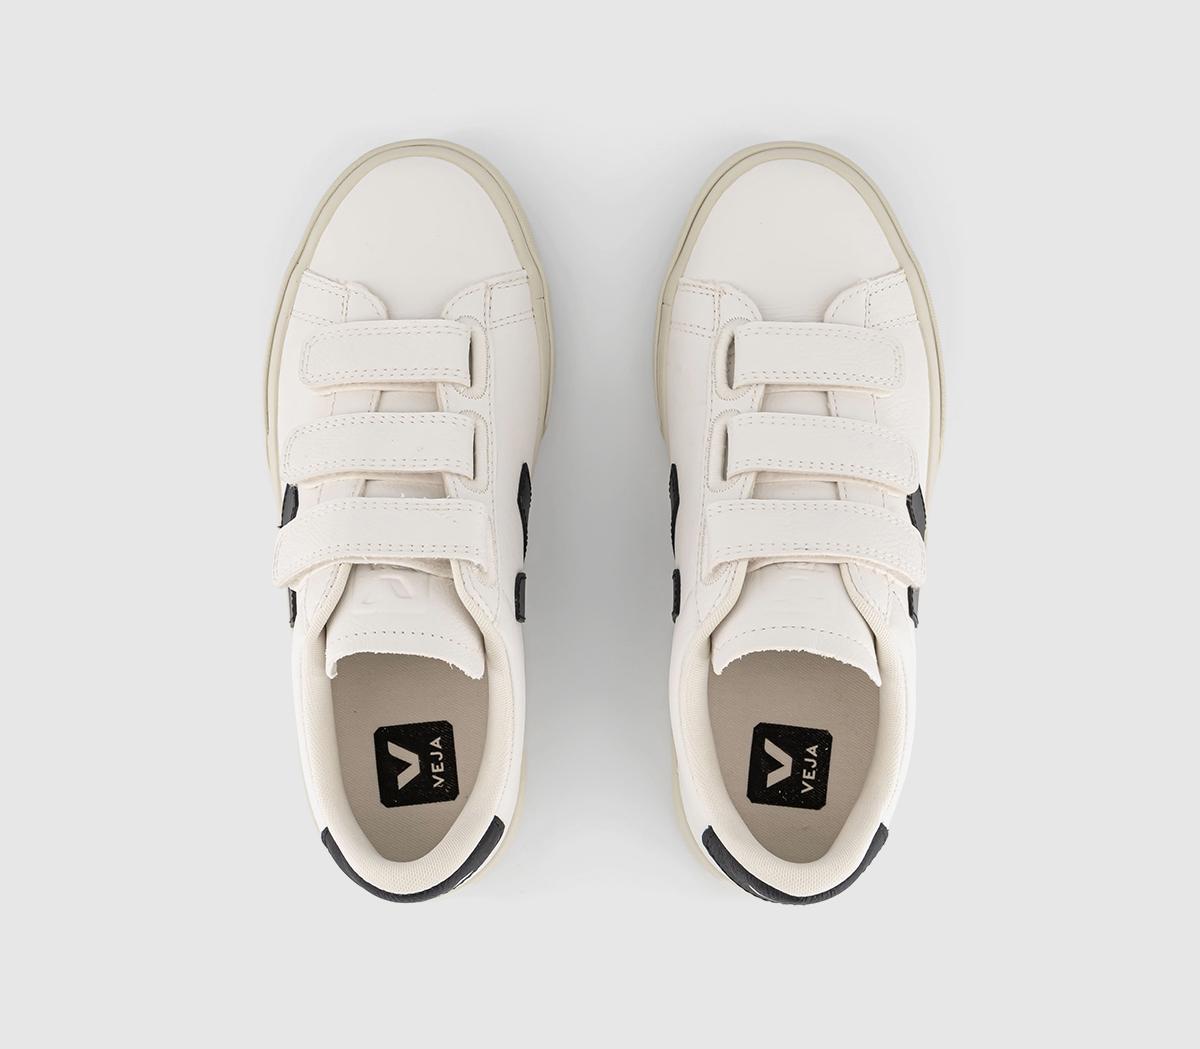 VEJA Recife Trainers Extra White Black F - Excluded From Site